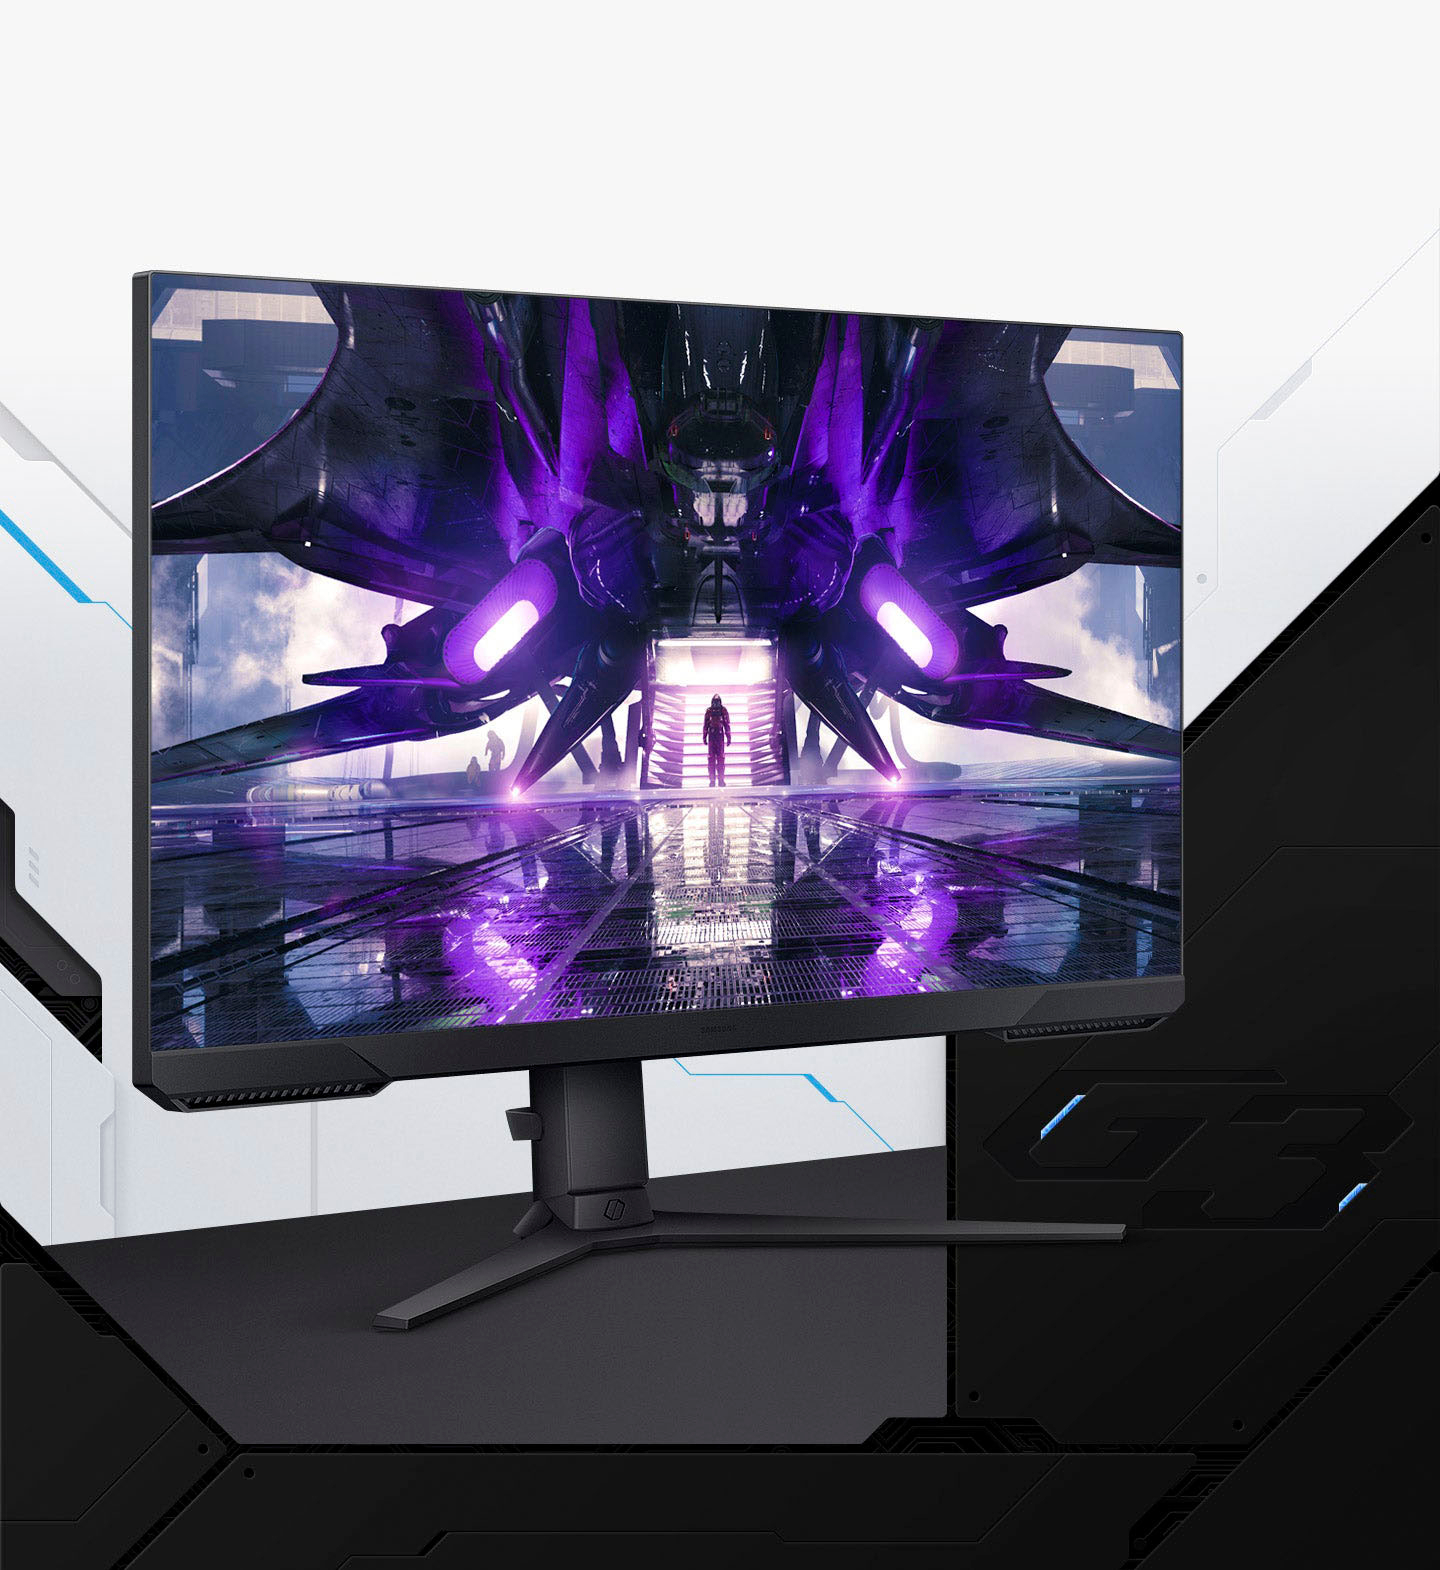 Samsung Odyssey G3 27 Gaming Monitor - Unboxing 